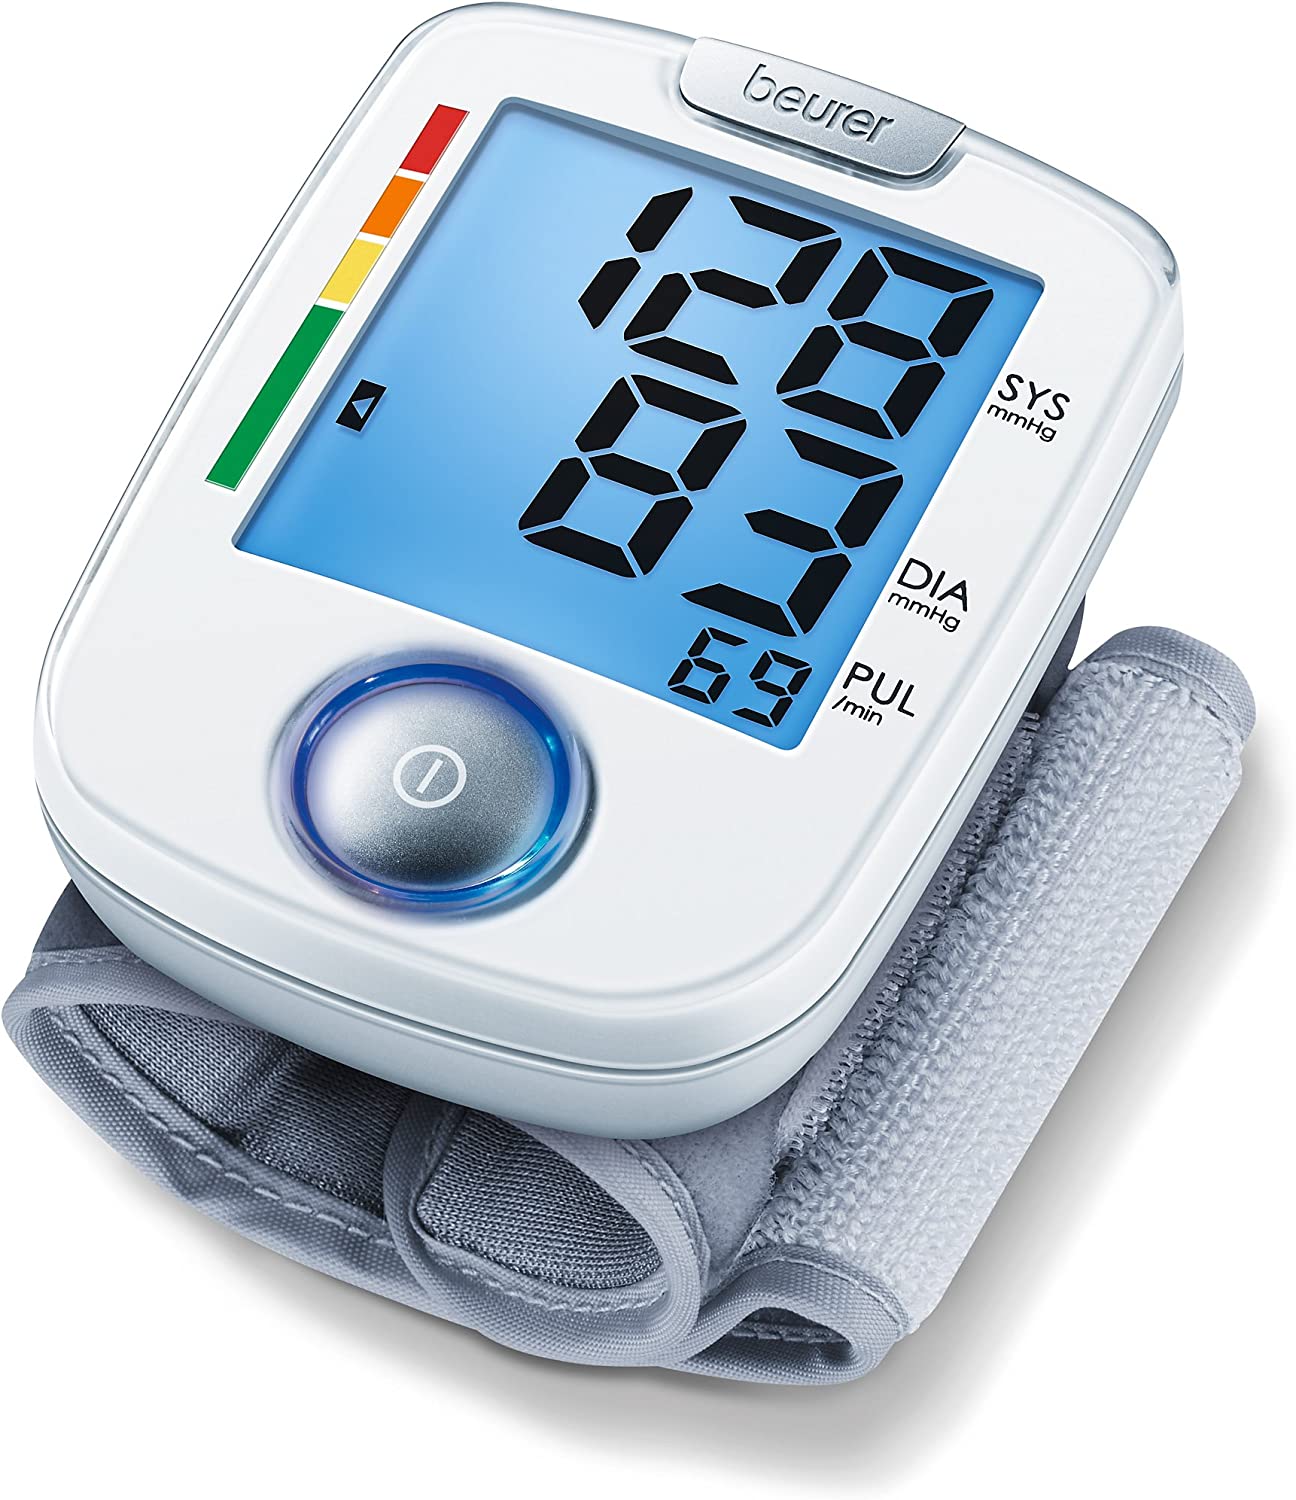 Beurer BC 44 wrist blood pressure monitor with comfortable one-button operation for easy, fully automatic blood pressure and pulse measurement on the wrist